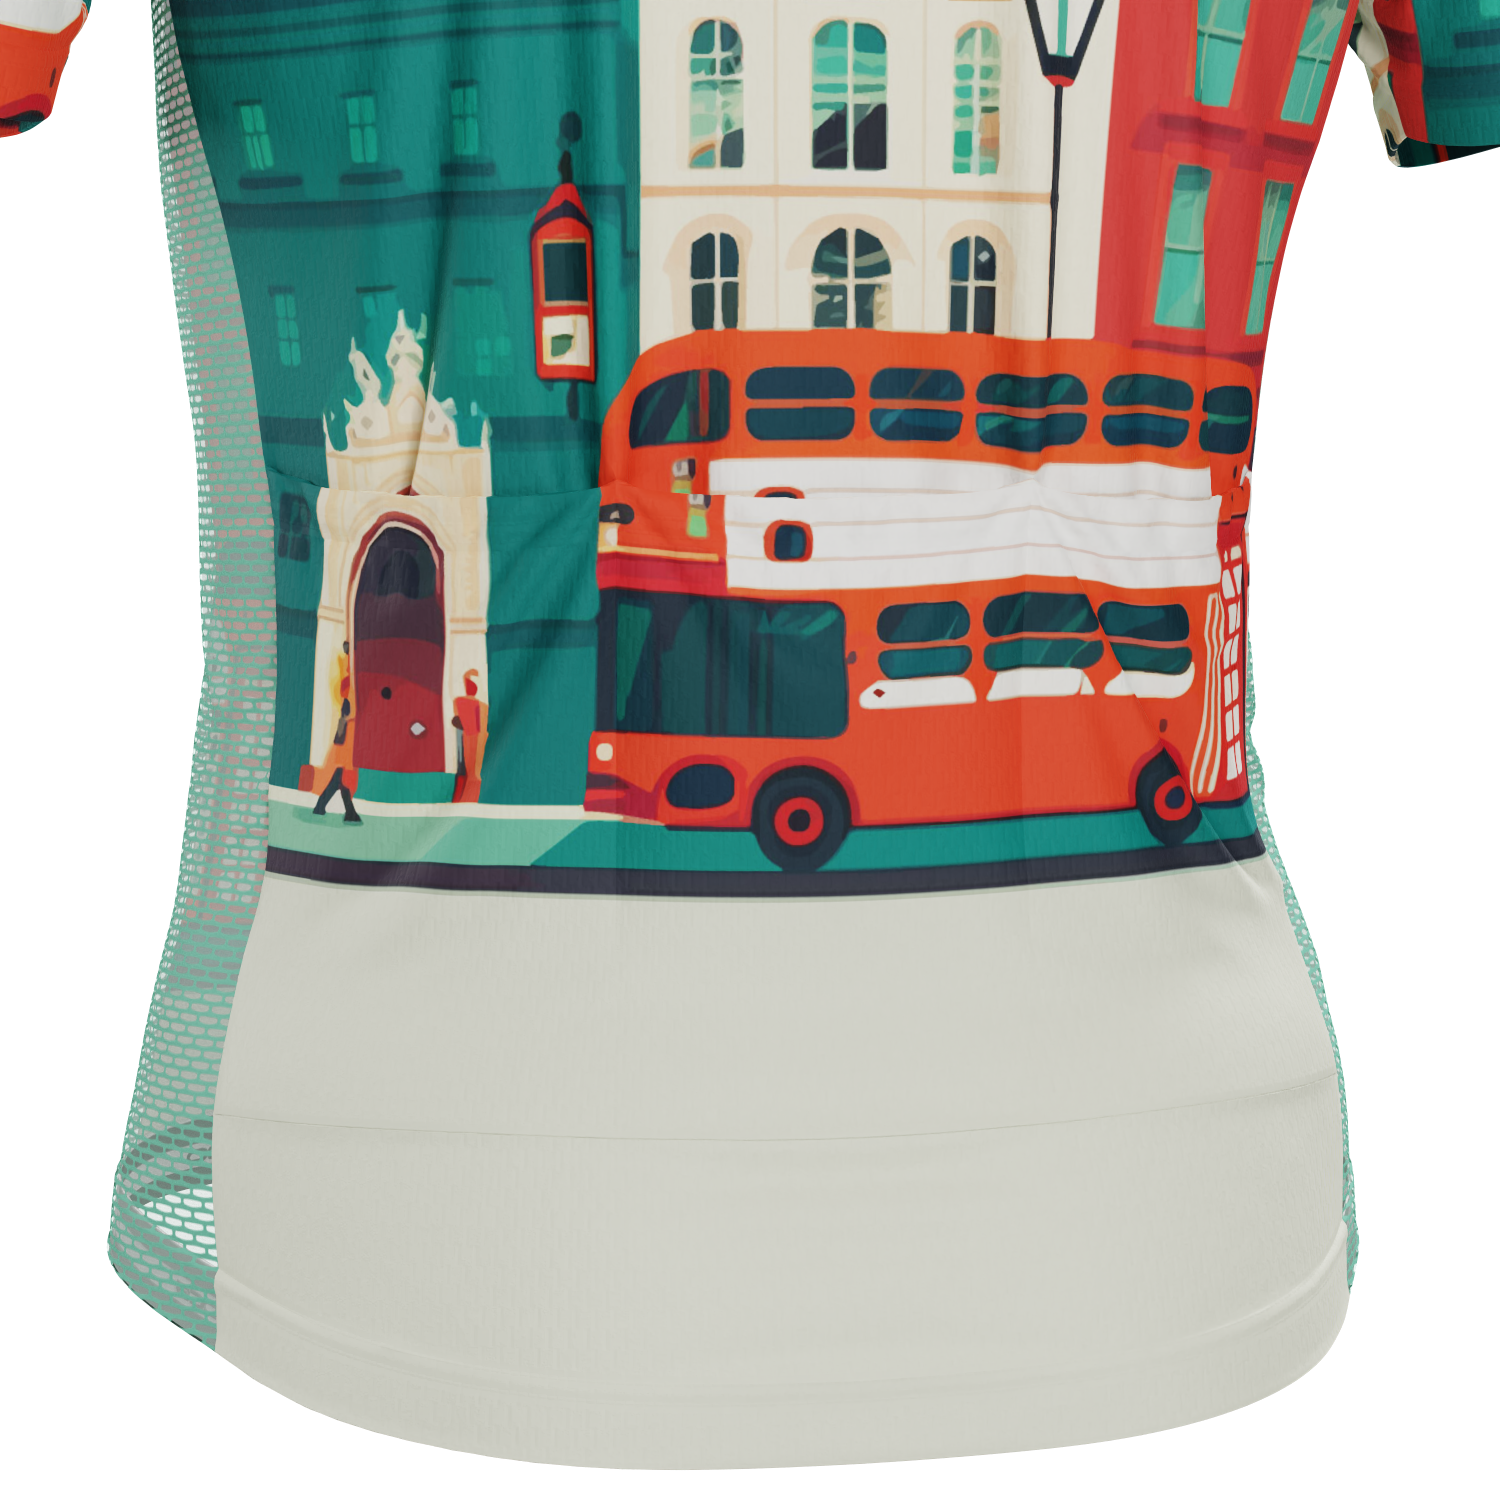 Men's Around The World - London Short Sleeve Cycling Jersey